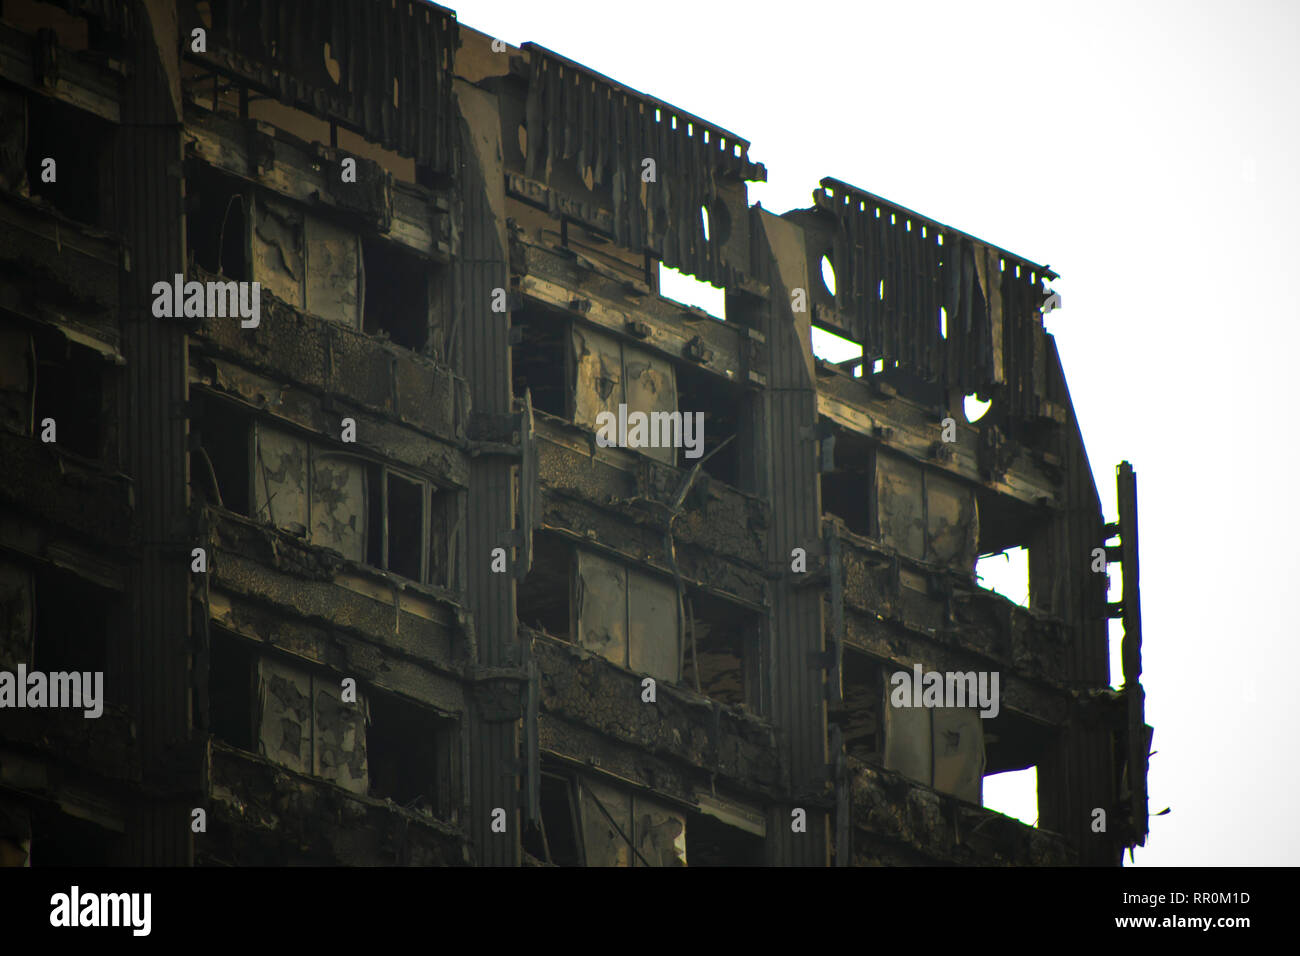 Grenfell Tower, London, really close up Stock Photo